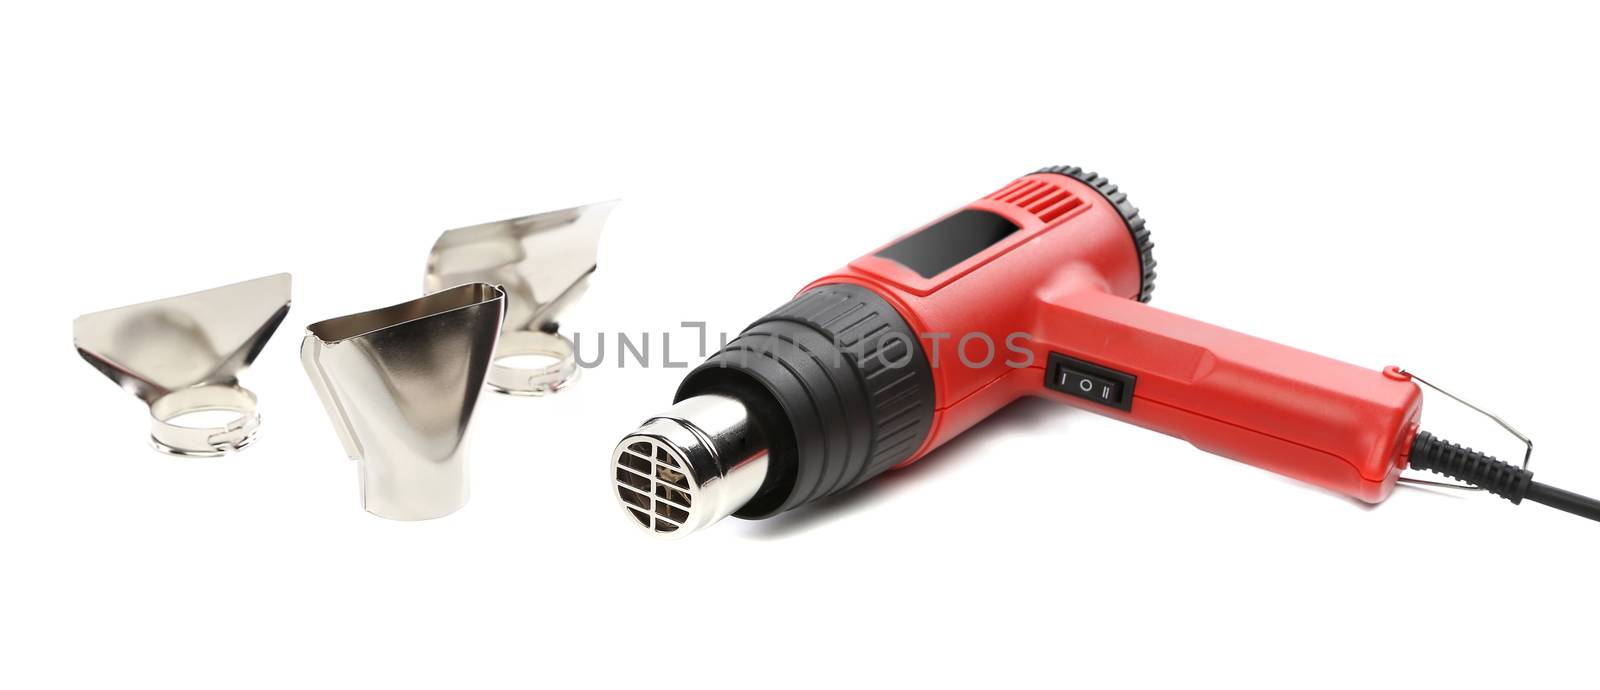 Hot air gun with tips. Isolated on a white background.